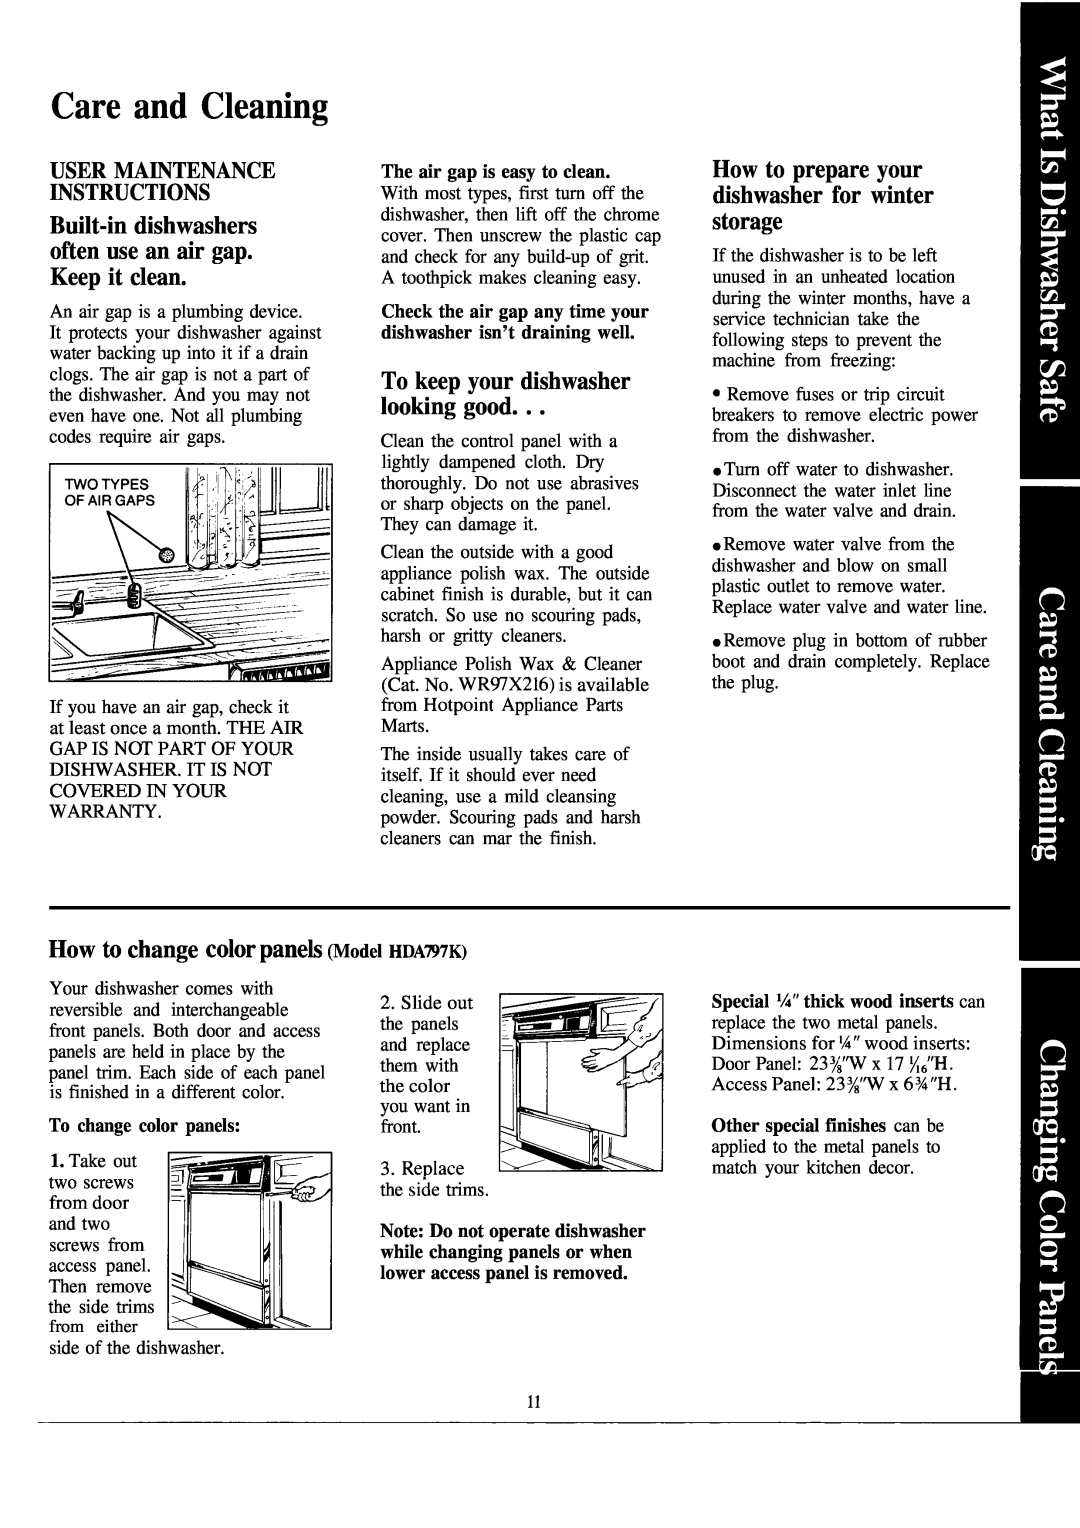 Hotpoint HDA797K Care and Cleaning, How to prepare your dishwasher for winter storage, User Maintenance Instructions 